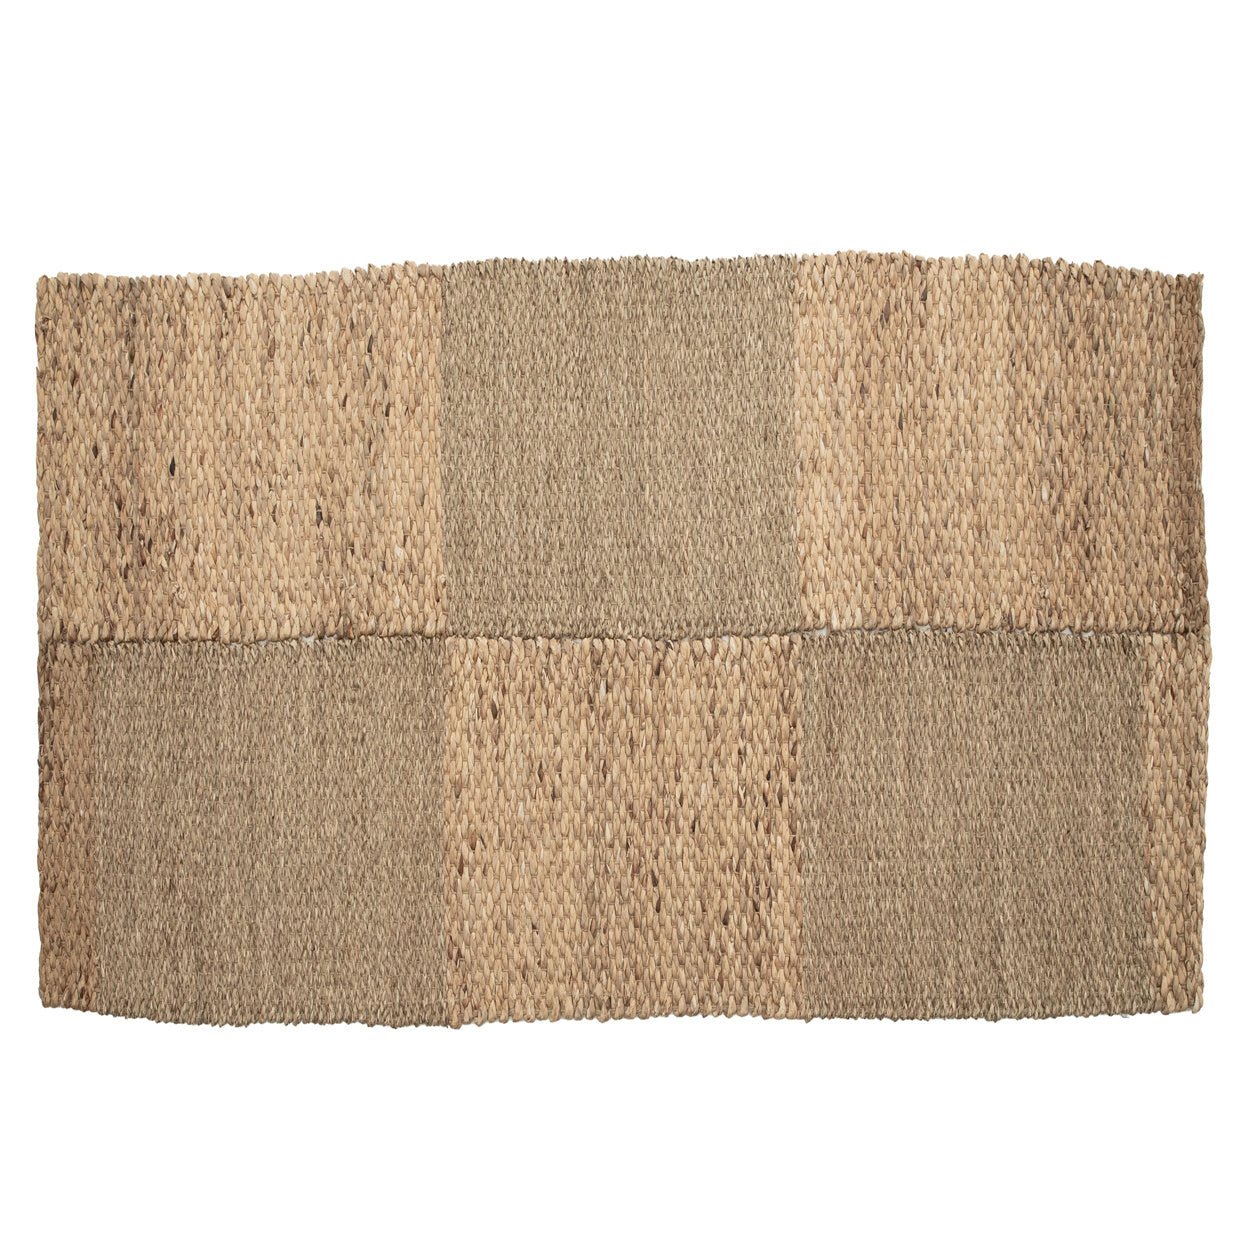 The Paddle Field Rug - Natural - 280x175